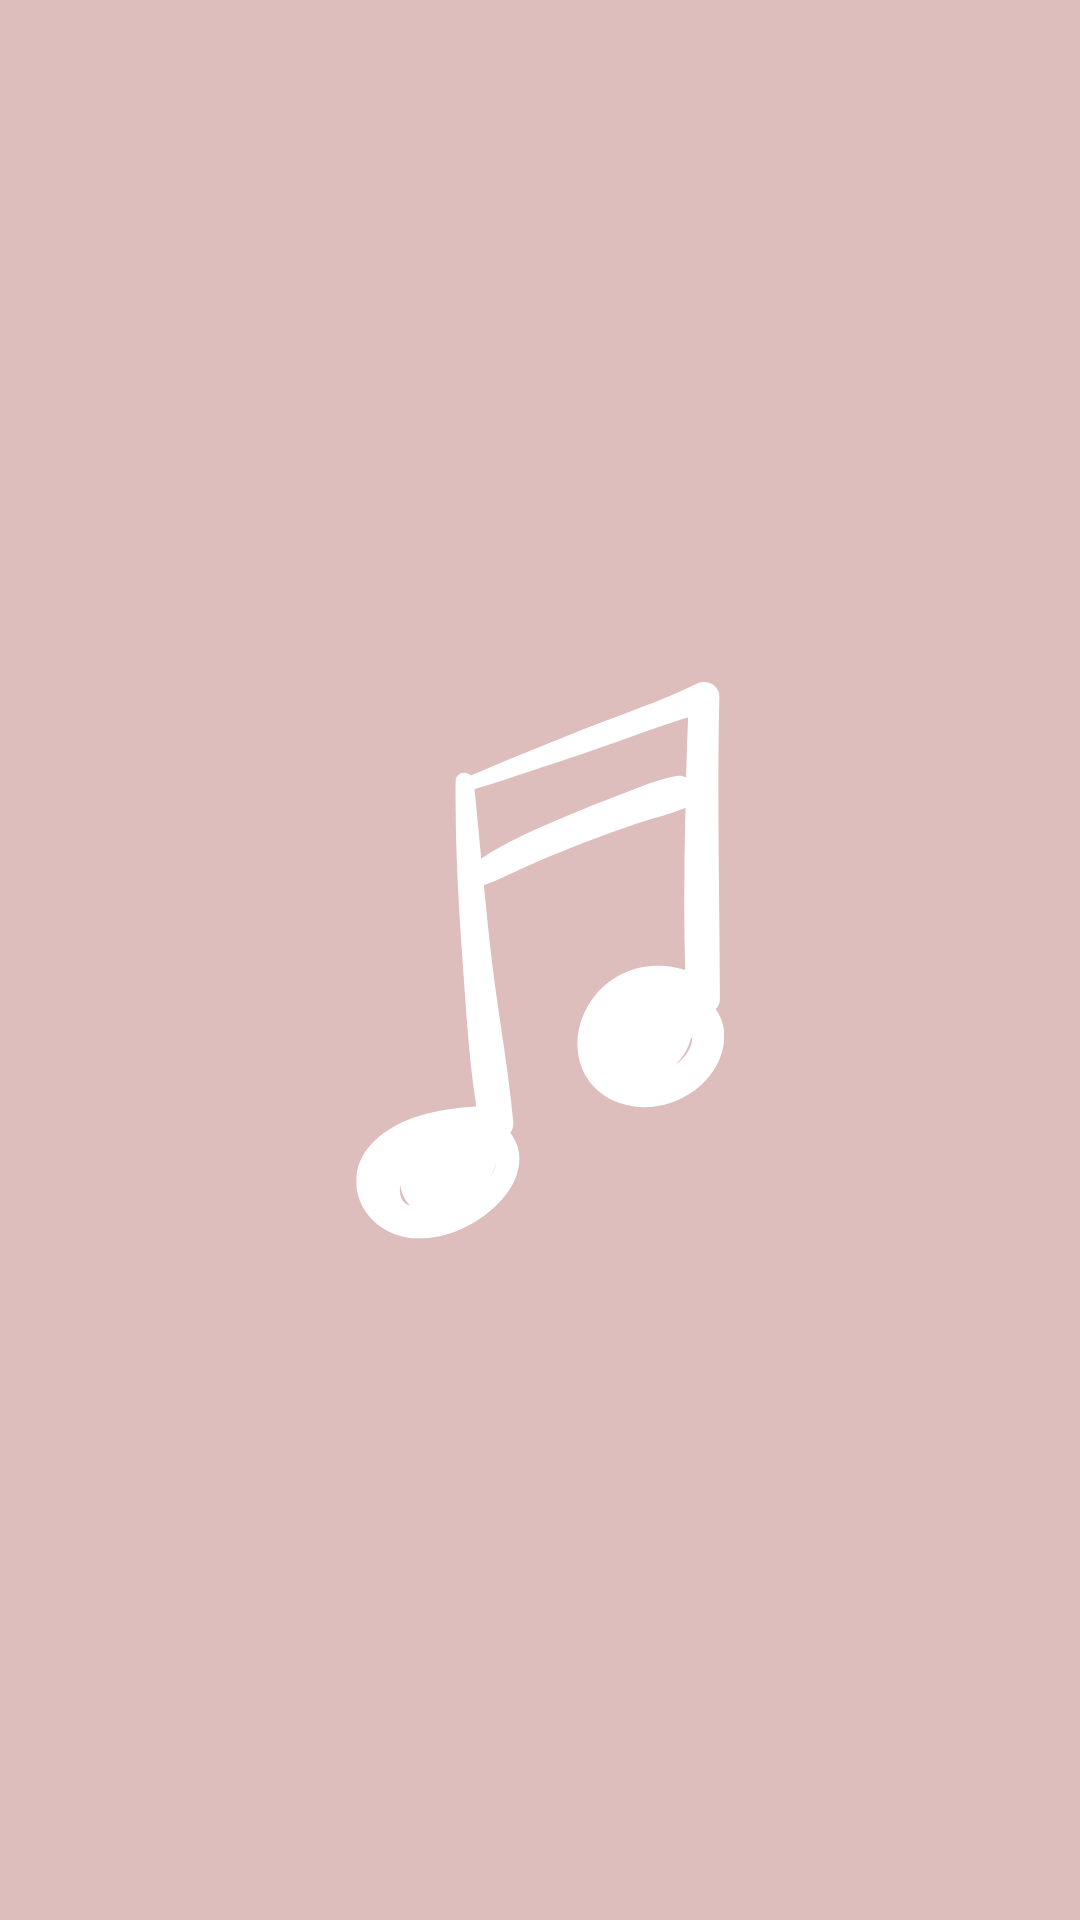 white music / musical note icon on a pink background for instagram